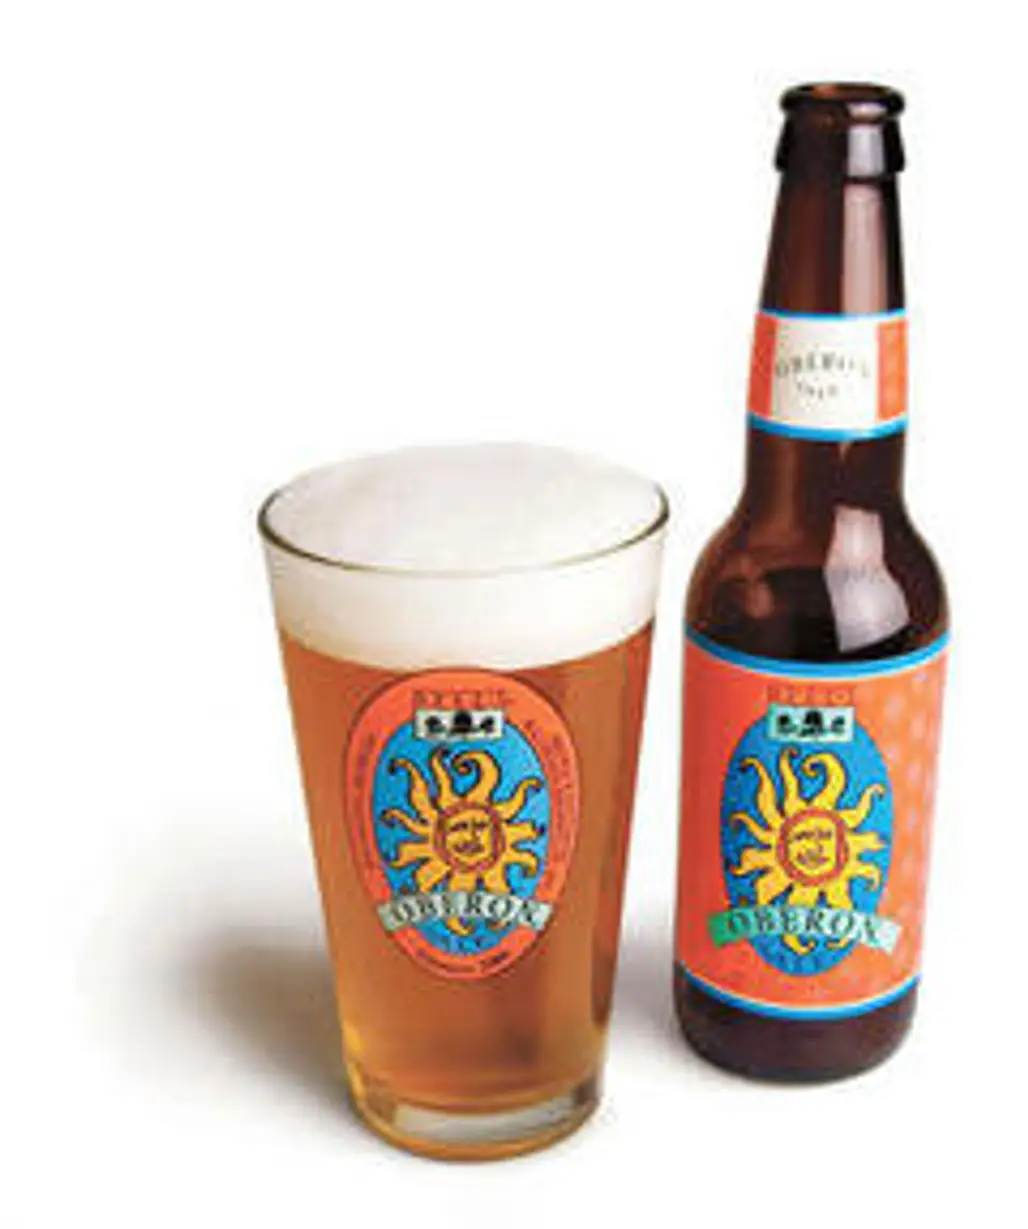 Bell’s Oberon Ale